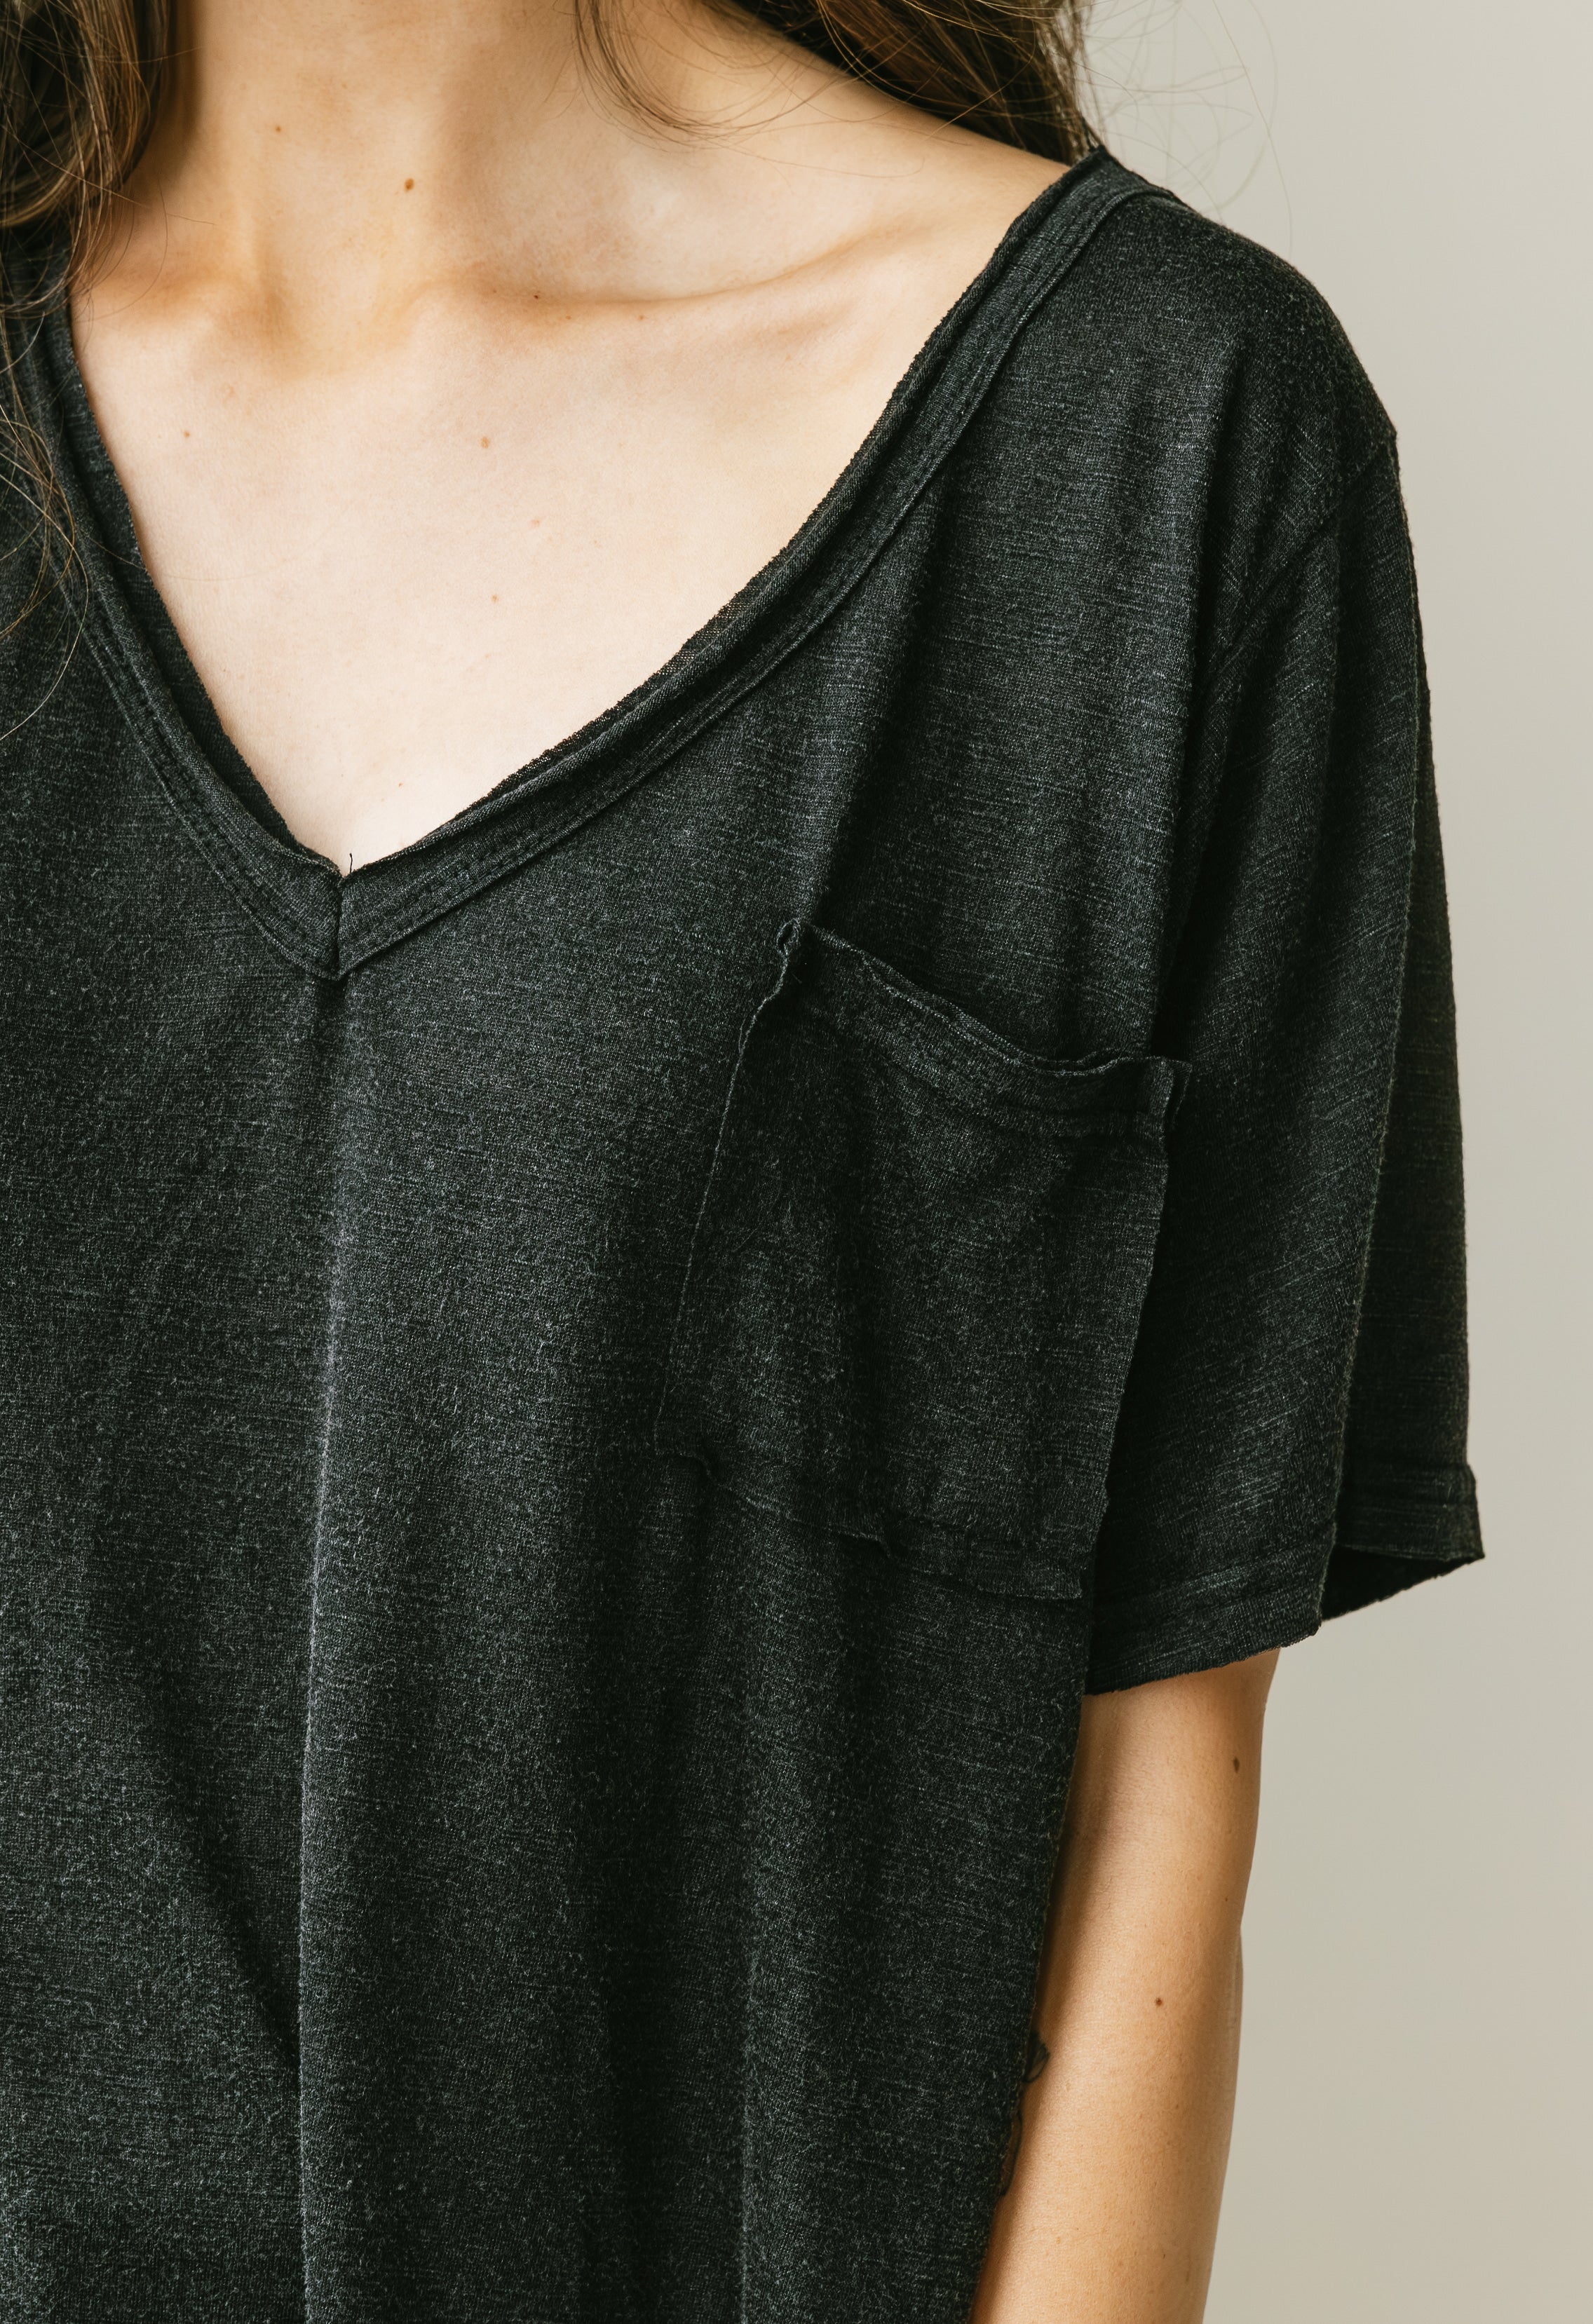 Harlow Tee - BLACK - willows clothing S/S Shirt